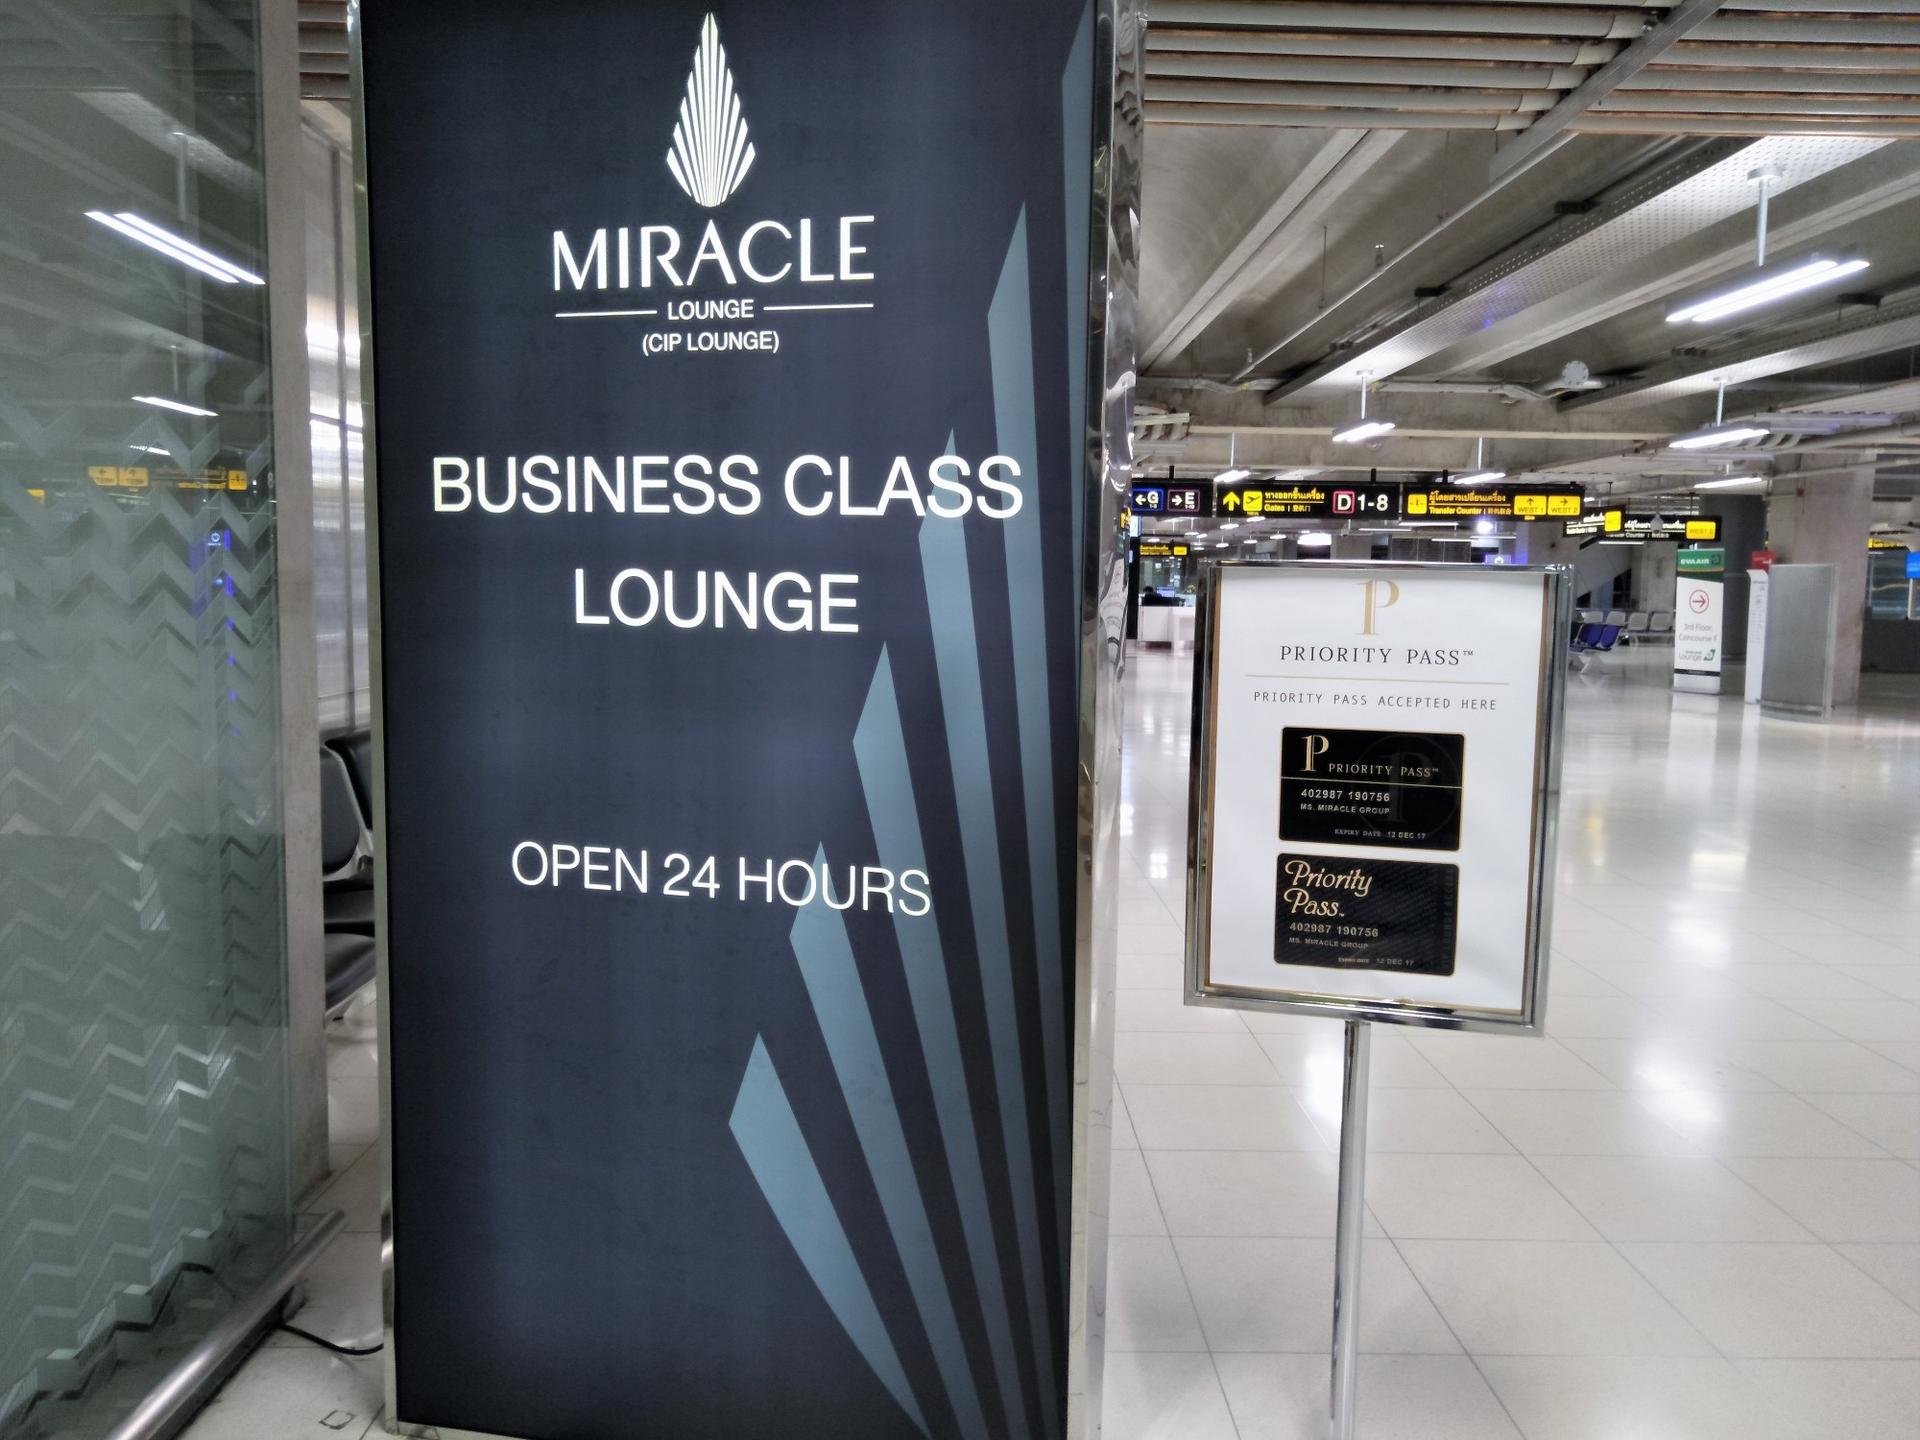 Miracle Business Class Lounge  image 15 of 26